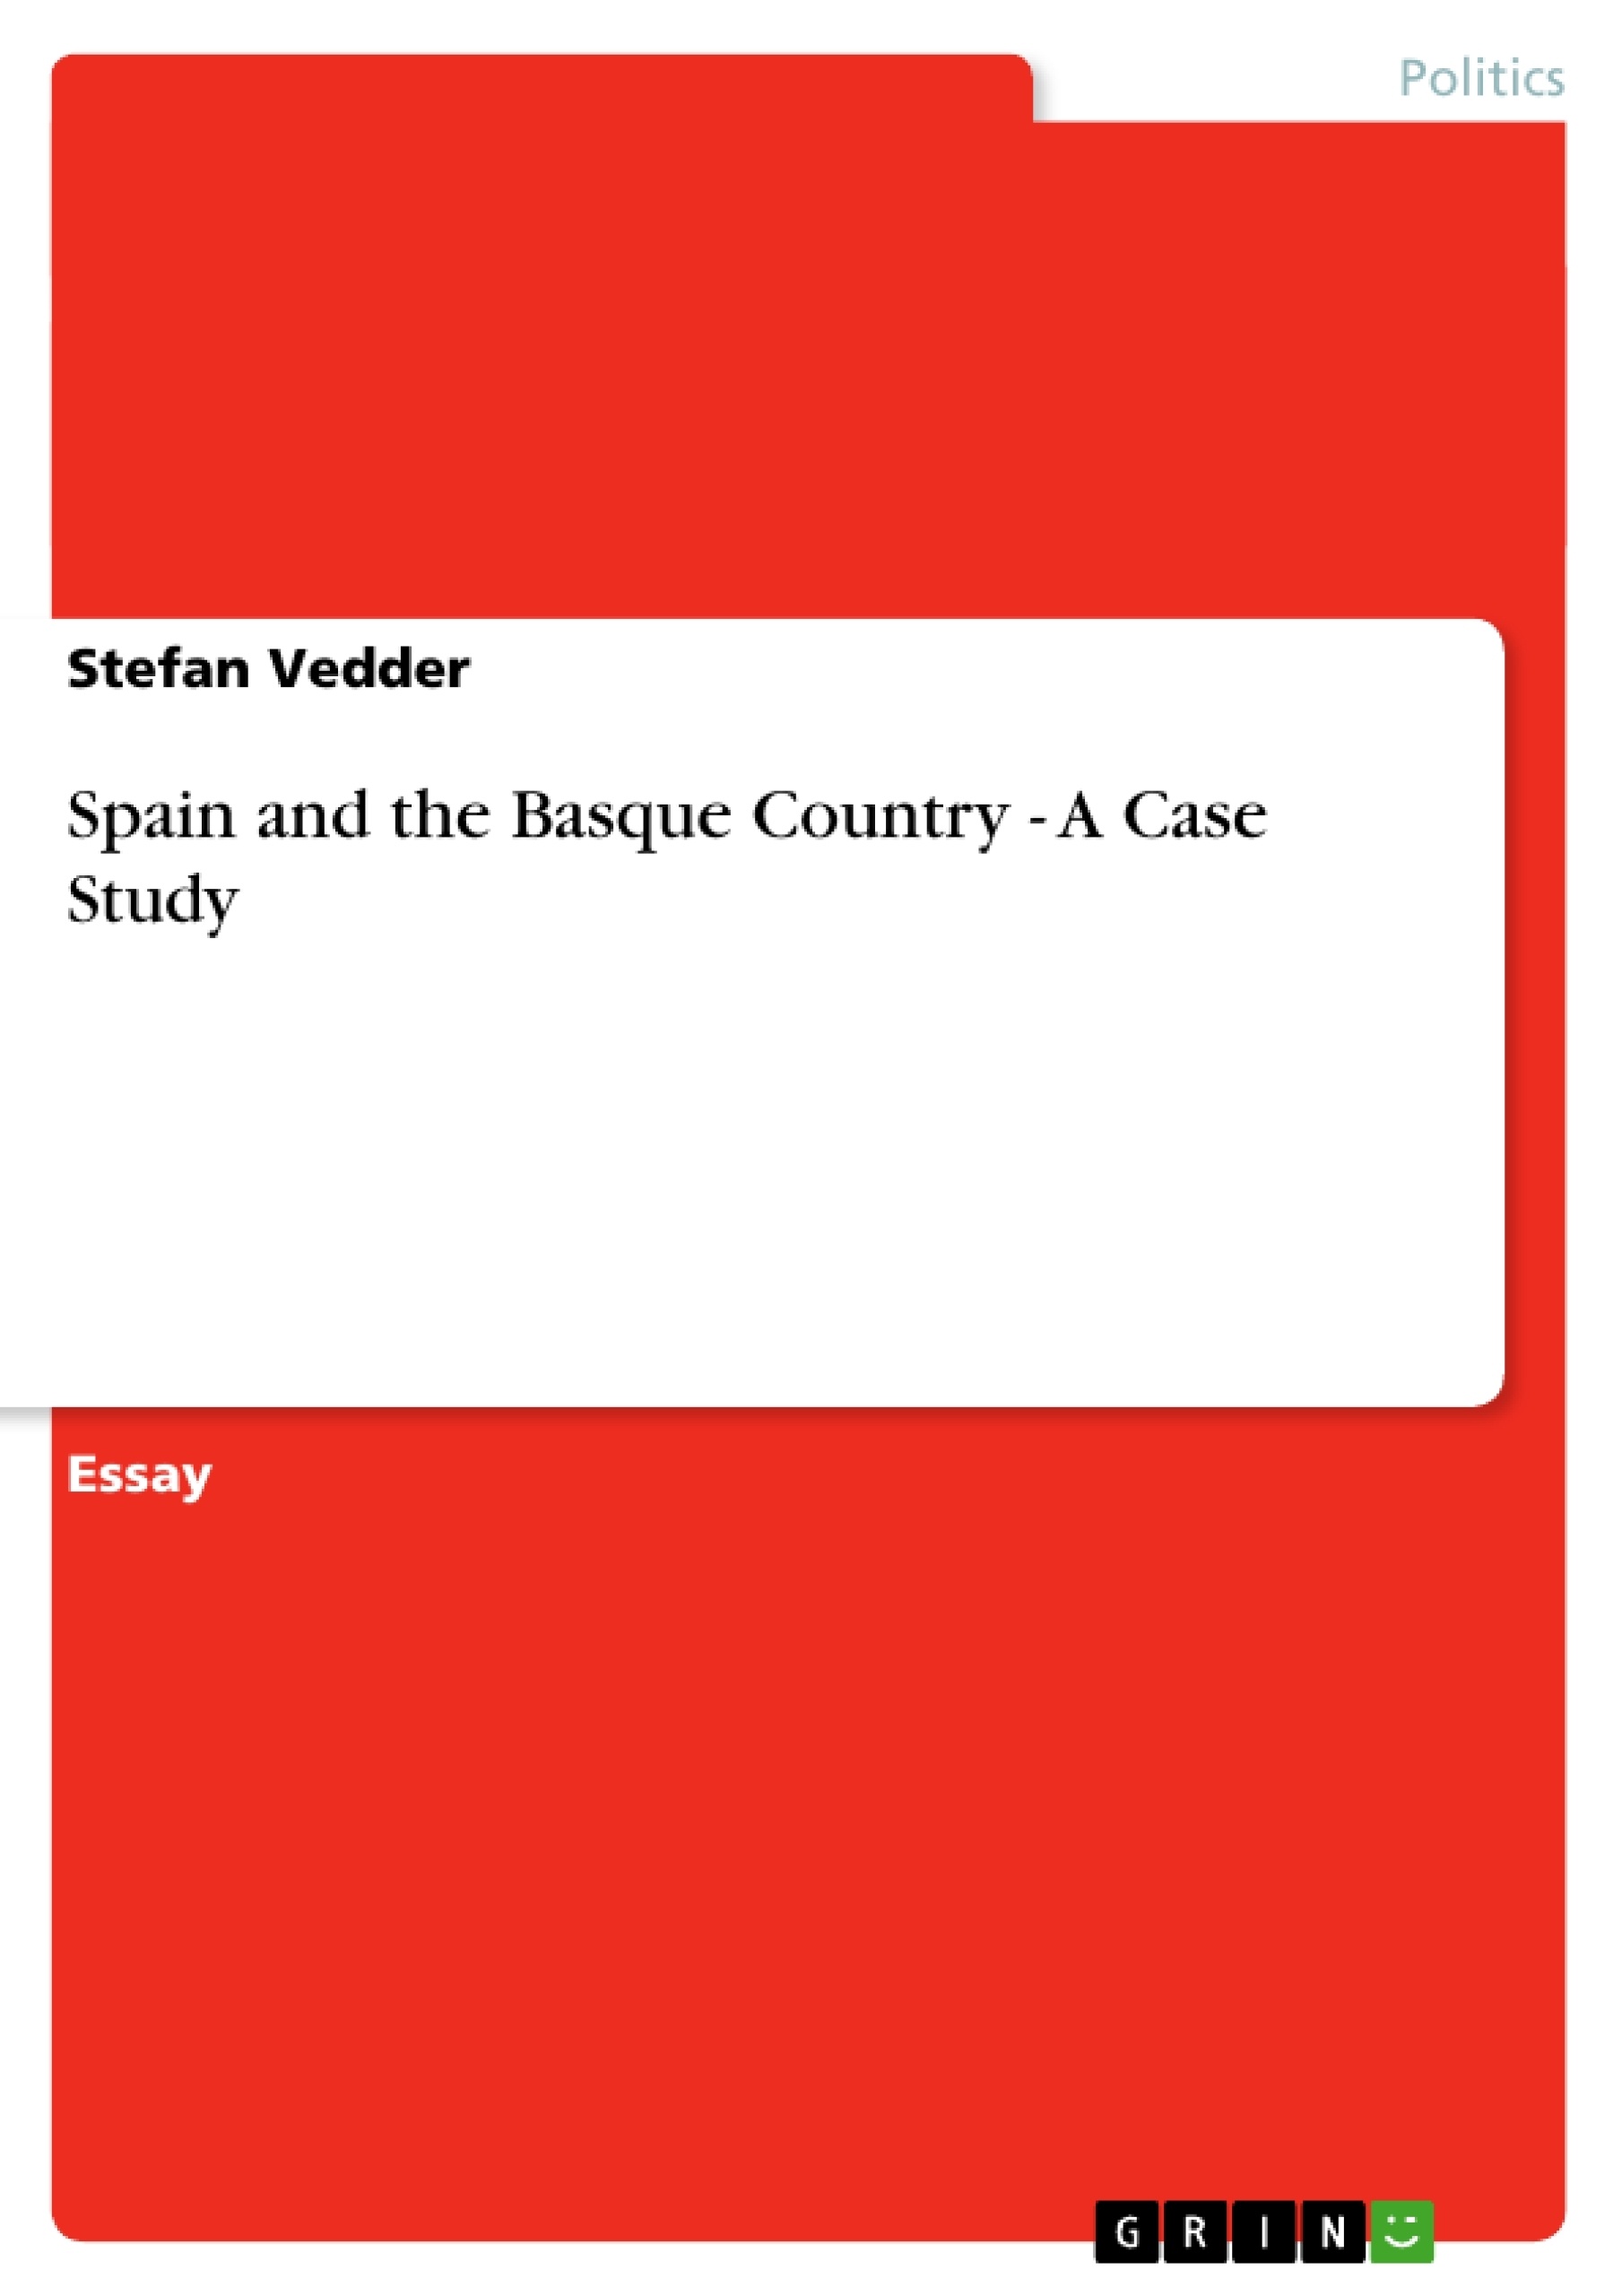 Titre: Spain and the Basque Country - A Case Study